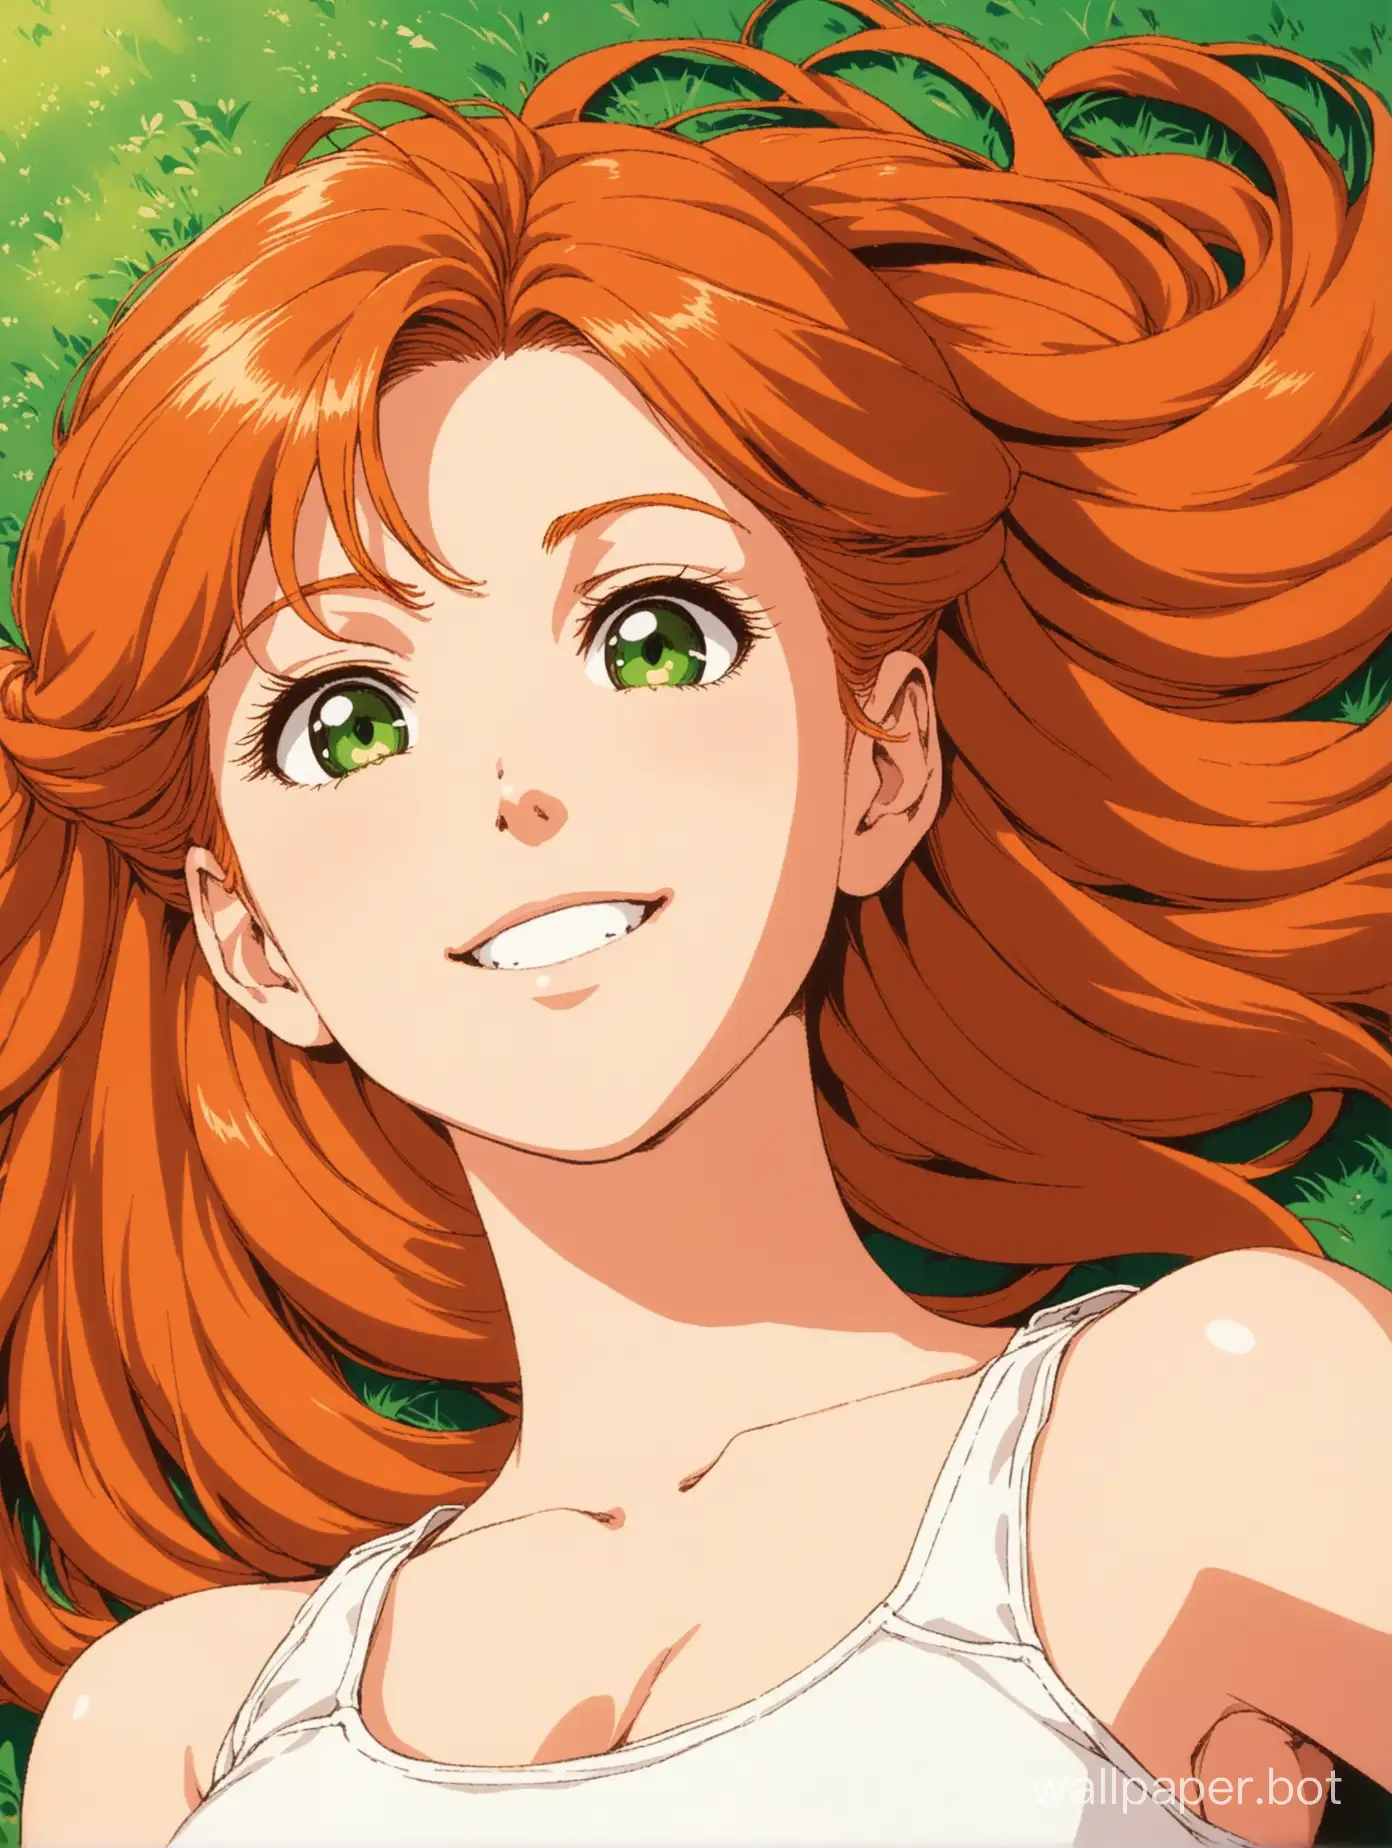 top-down angle view, view from above, 1980s anime, retro, American countryside background, portrait of a beautiful redhead woman laying on her back, adult woman, smiling subtly, mature face, she is introspective and naive, green eyes, pretty sharp face, pale skin, long fluffy orange hair with loose braids, midriff, wearing a white tank top, wearing low-cut denim shorts, sense of innocence, retro science fiction, 1980s anime